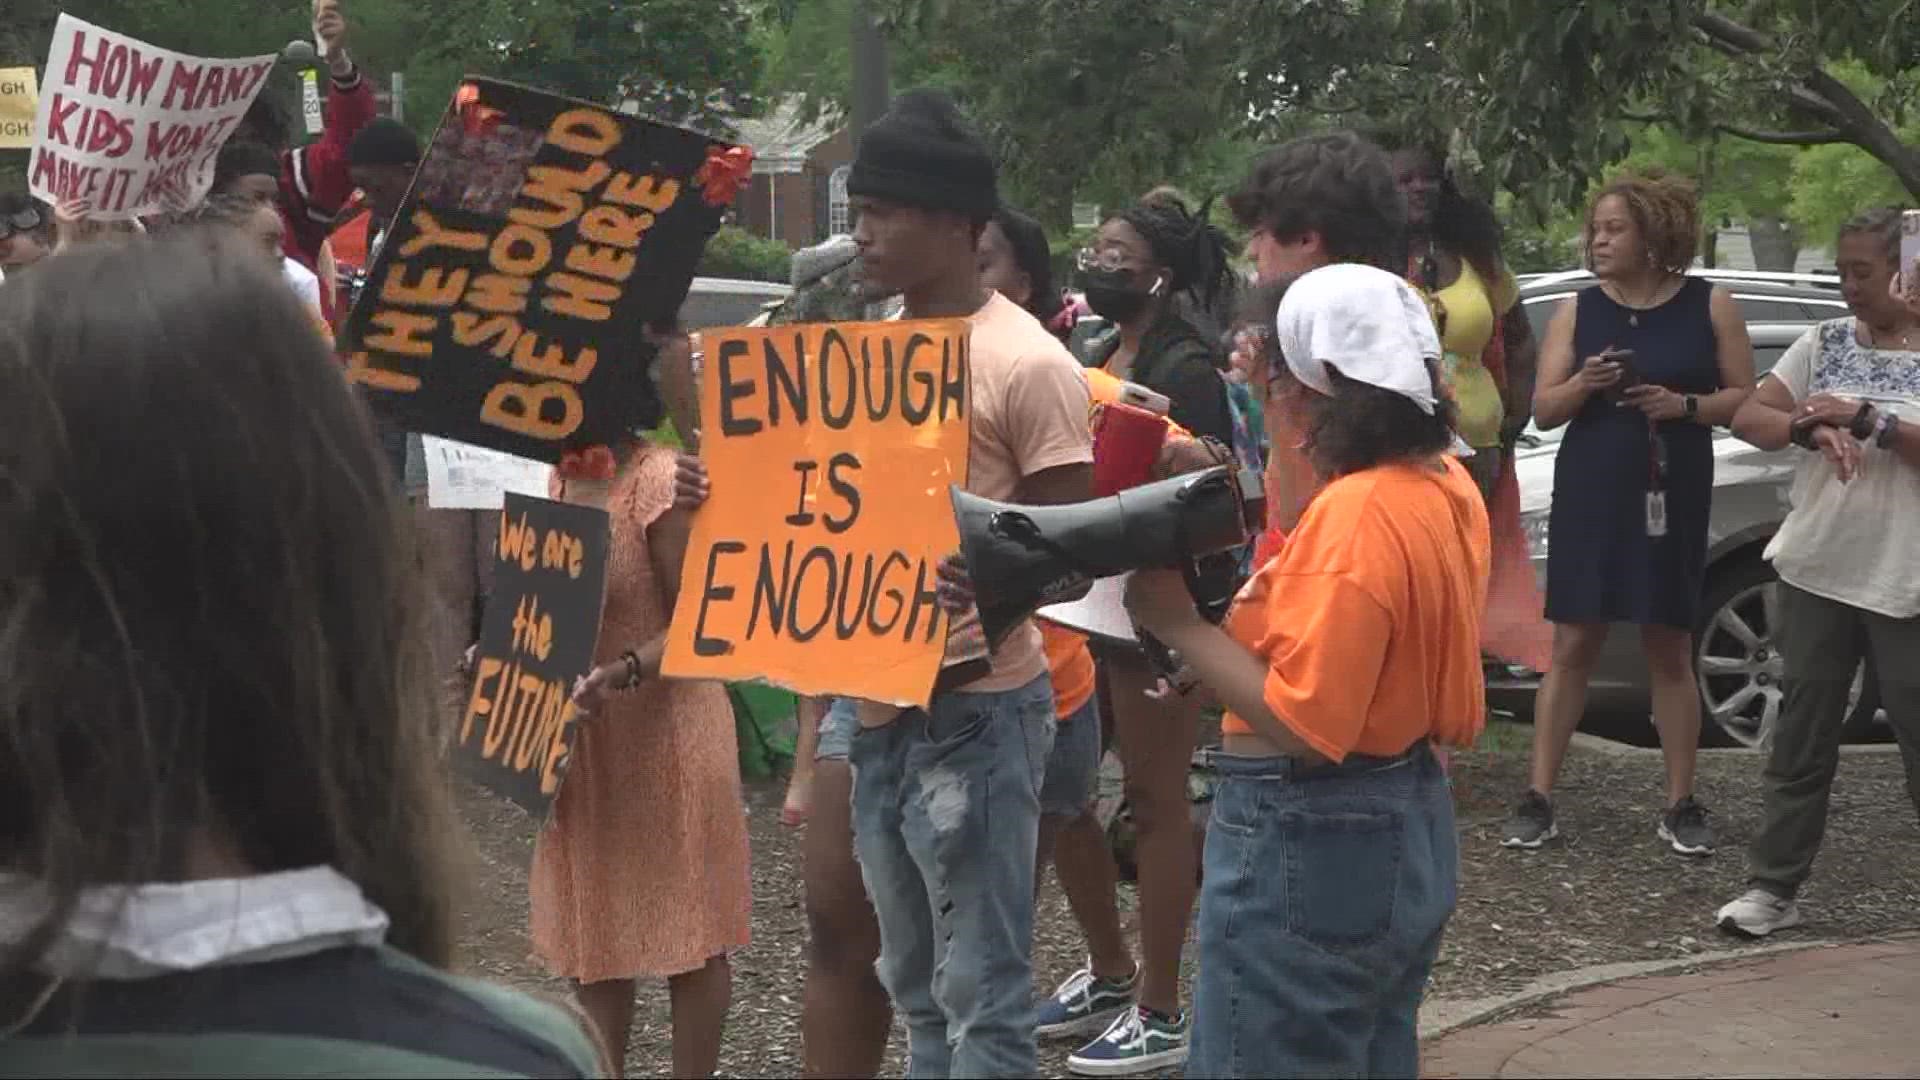 Hundreds of students in the Shaker Heights community walked out of class Thursday to demand change after the deadly school shooting in Uvalde, Texas.